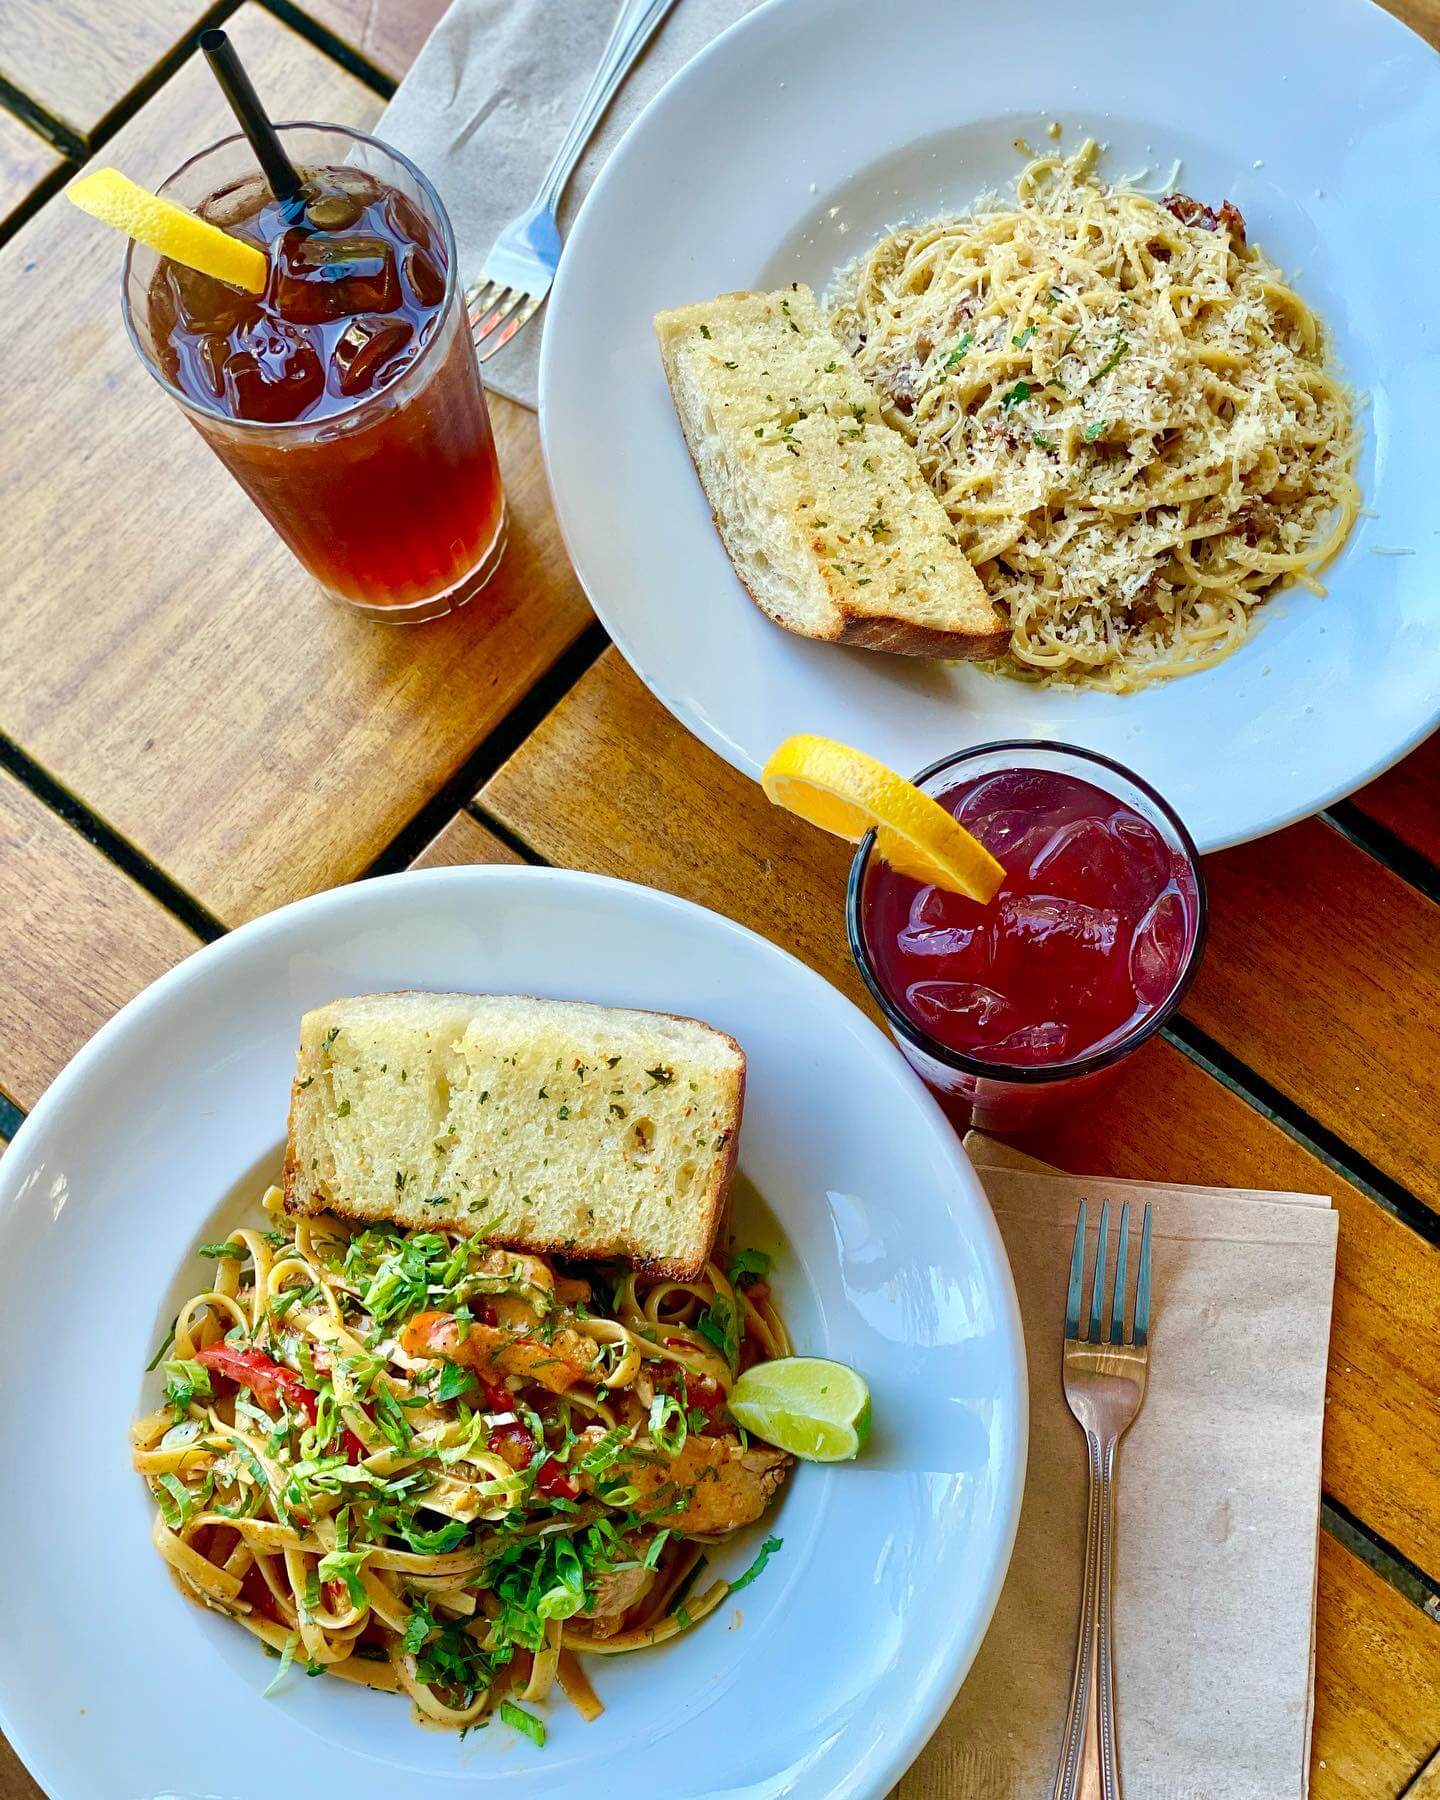 Two plates of pasta and garlic bread with two glasses of sangria.